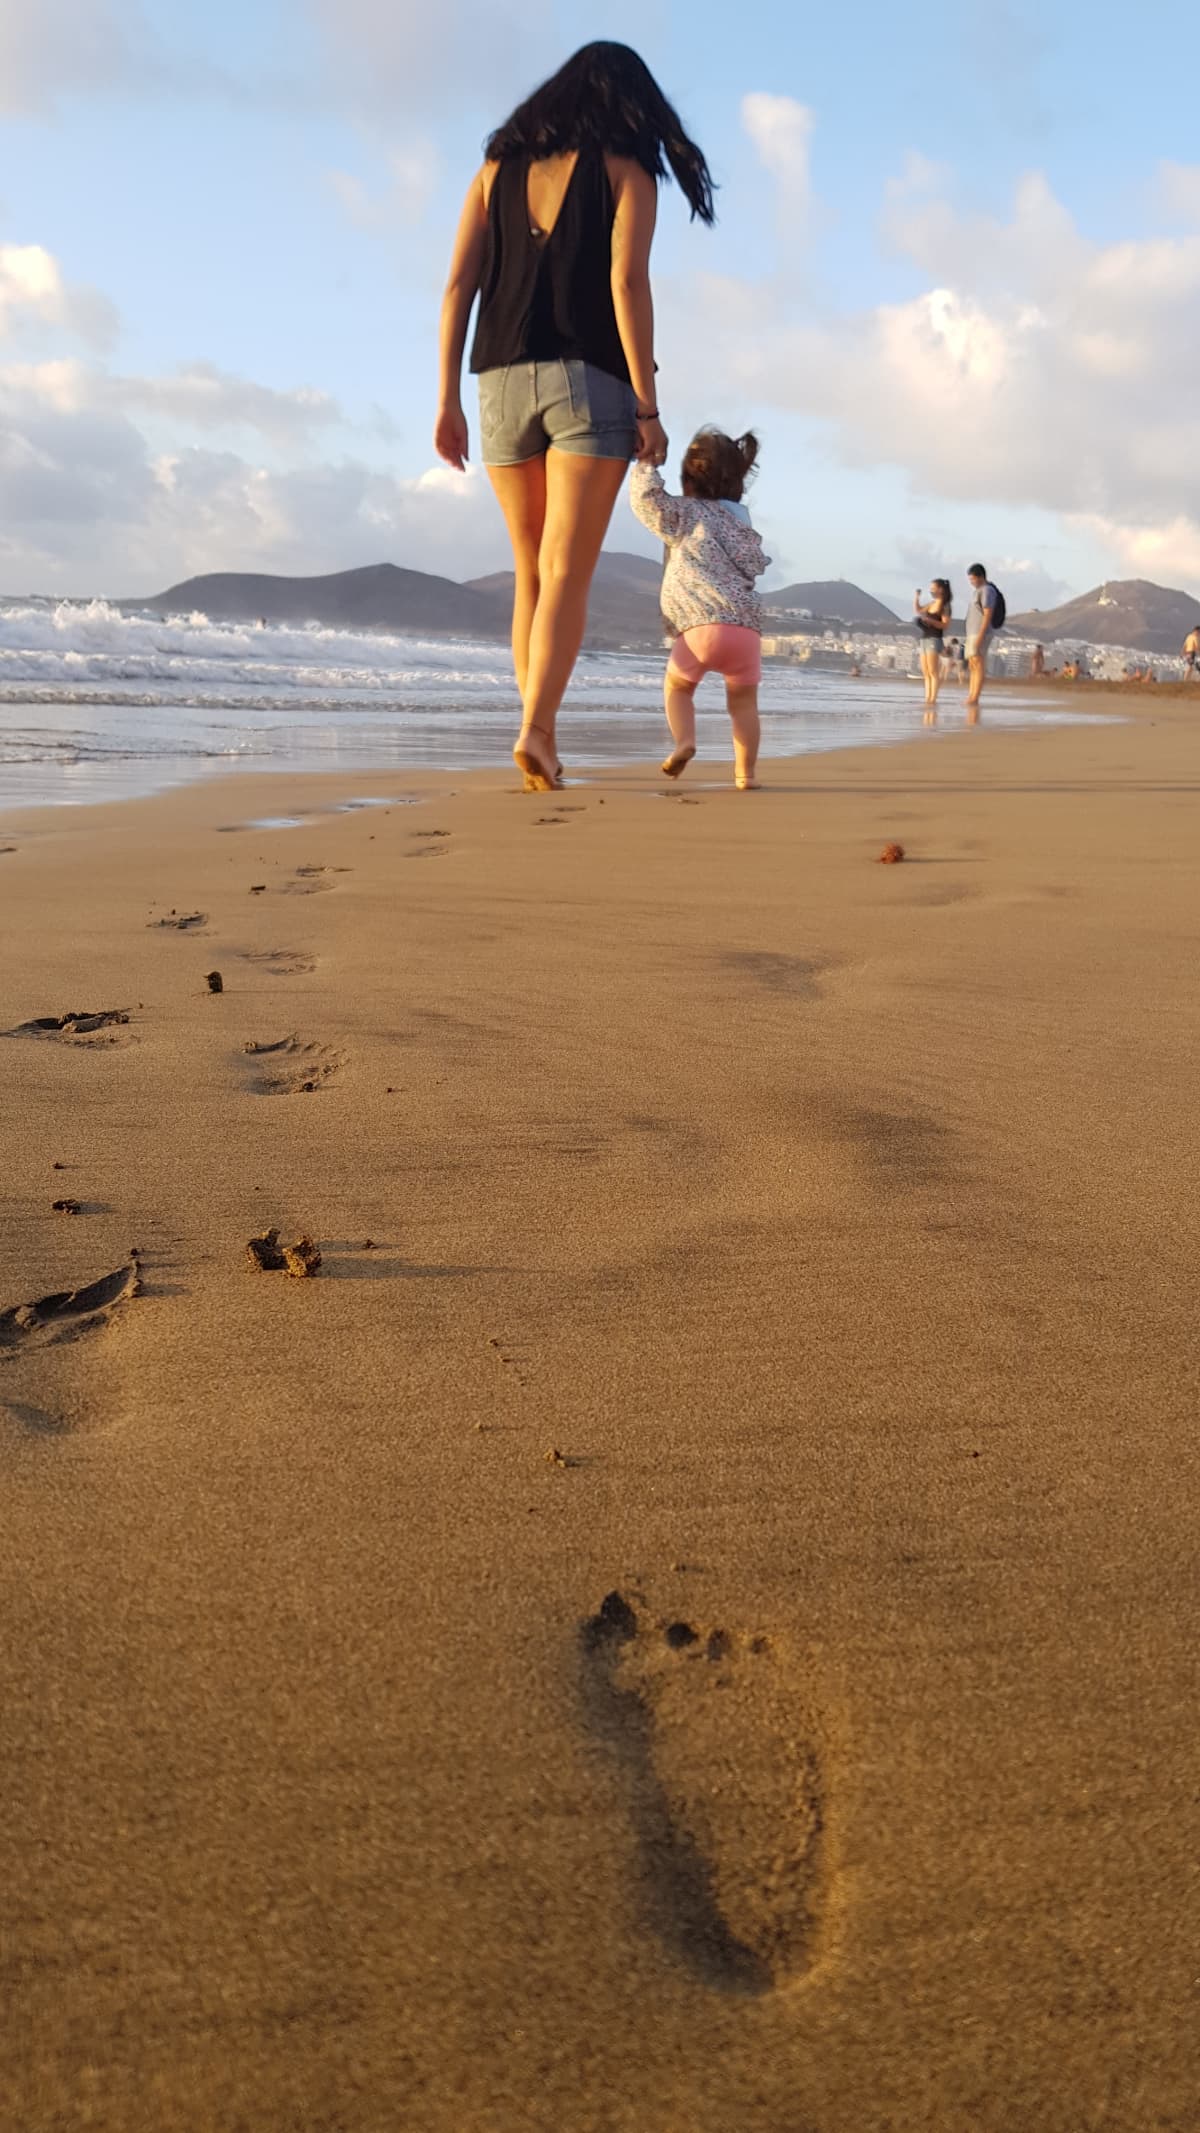 Woman and child walking on beach